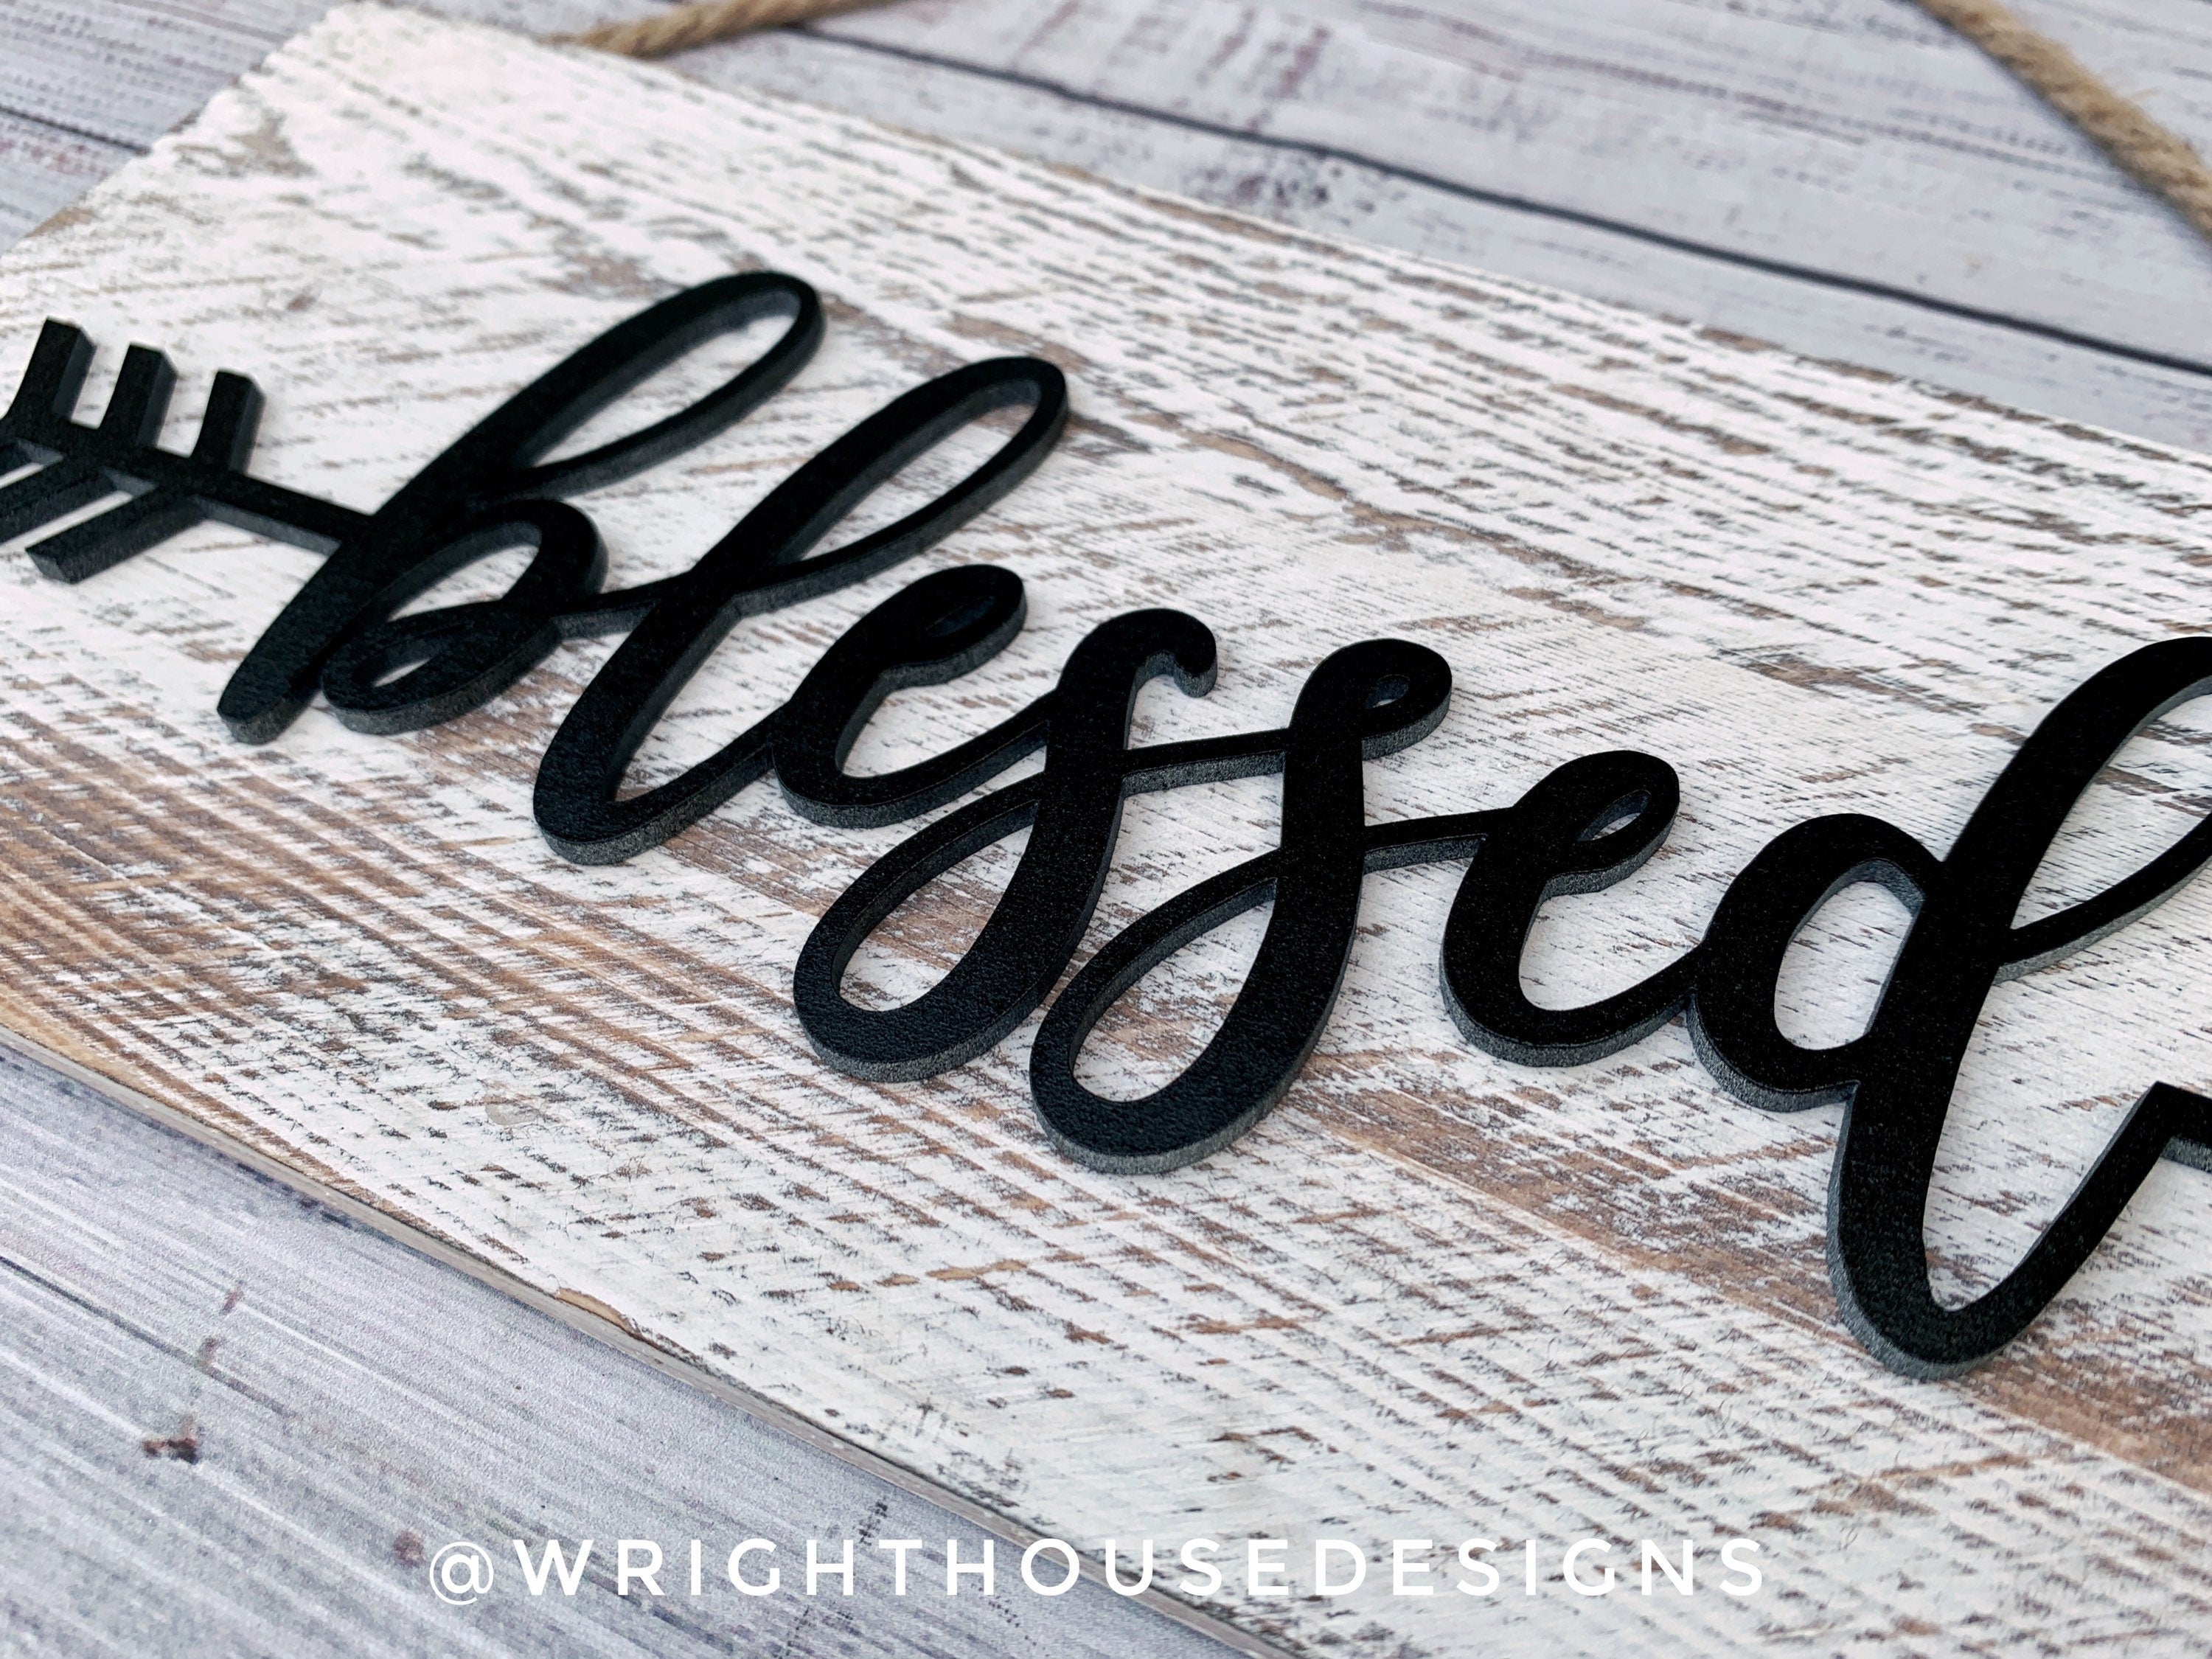 Blessed Arrow Word Art - Rustic Farmhouse - Whitewash Reclaimed Wood Plank Board Sign - Wooden Wall Art - Home Decor and She Shed Signs